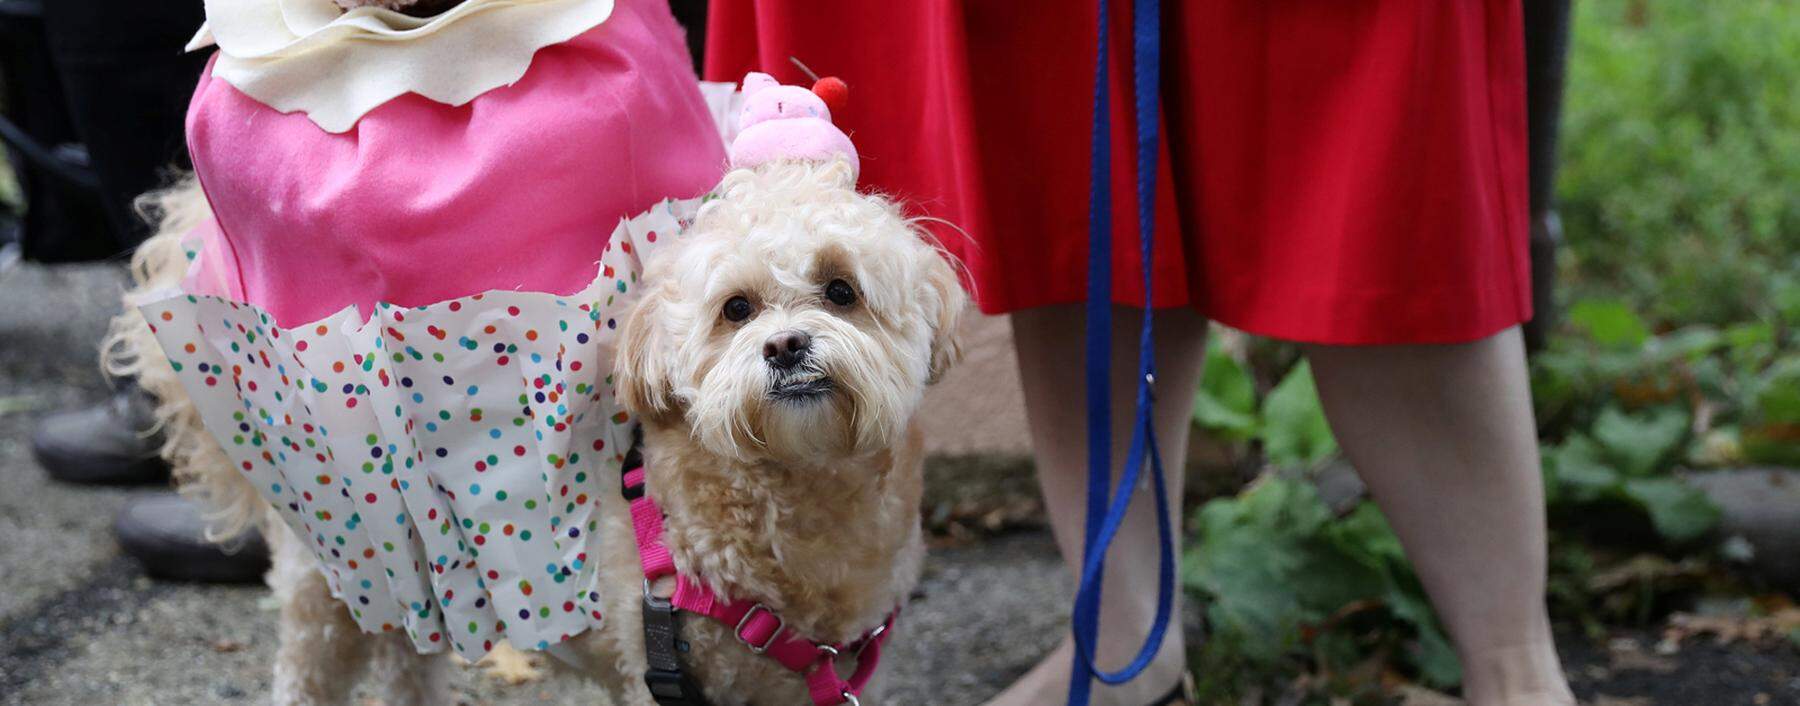 The 28th Annual Tompkins Square Halloween Dog Parade